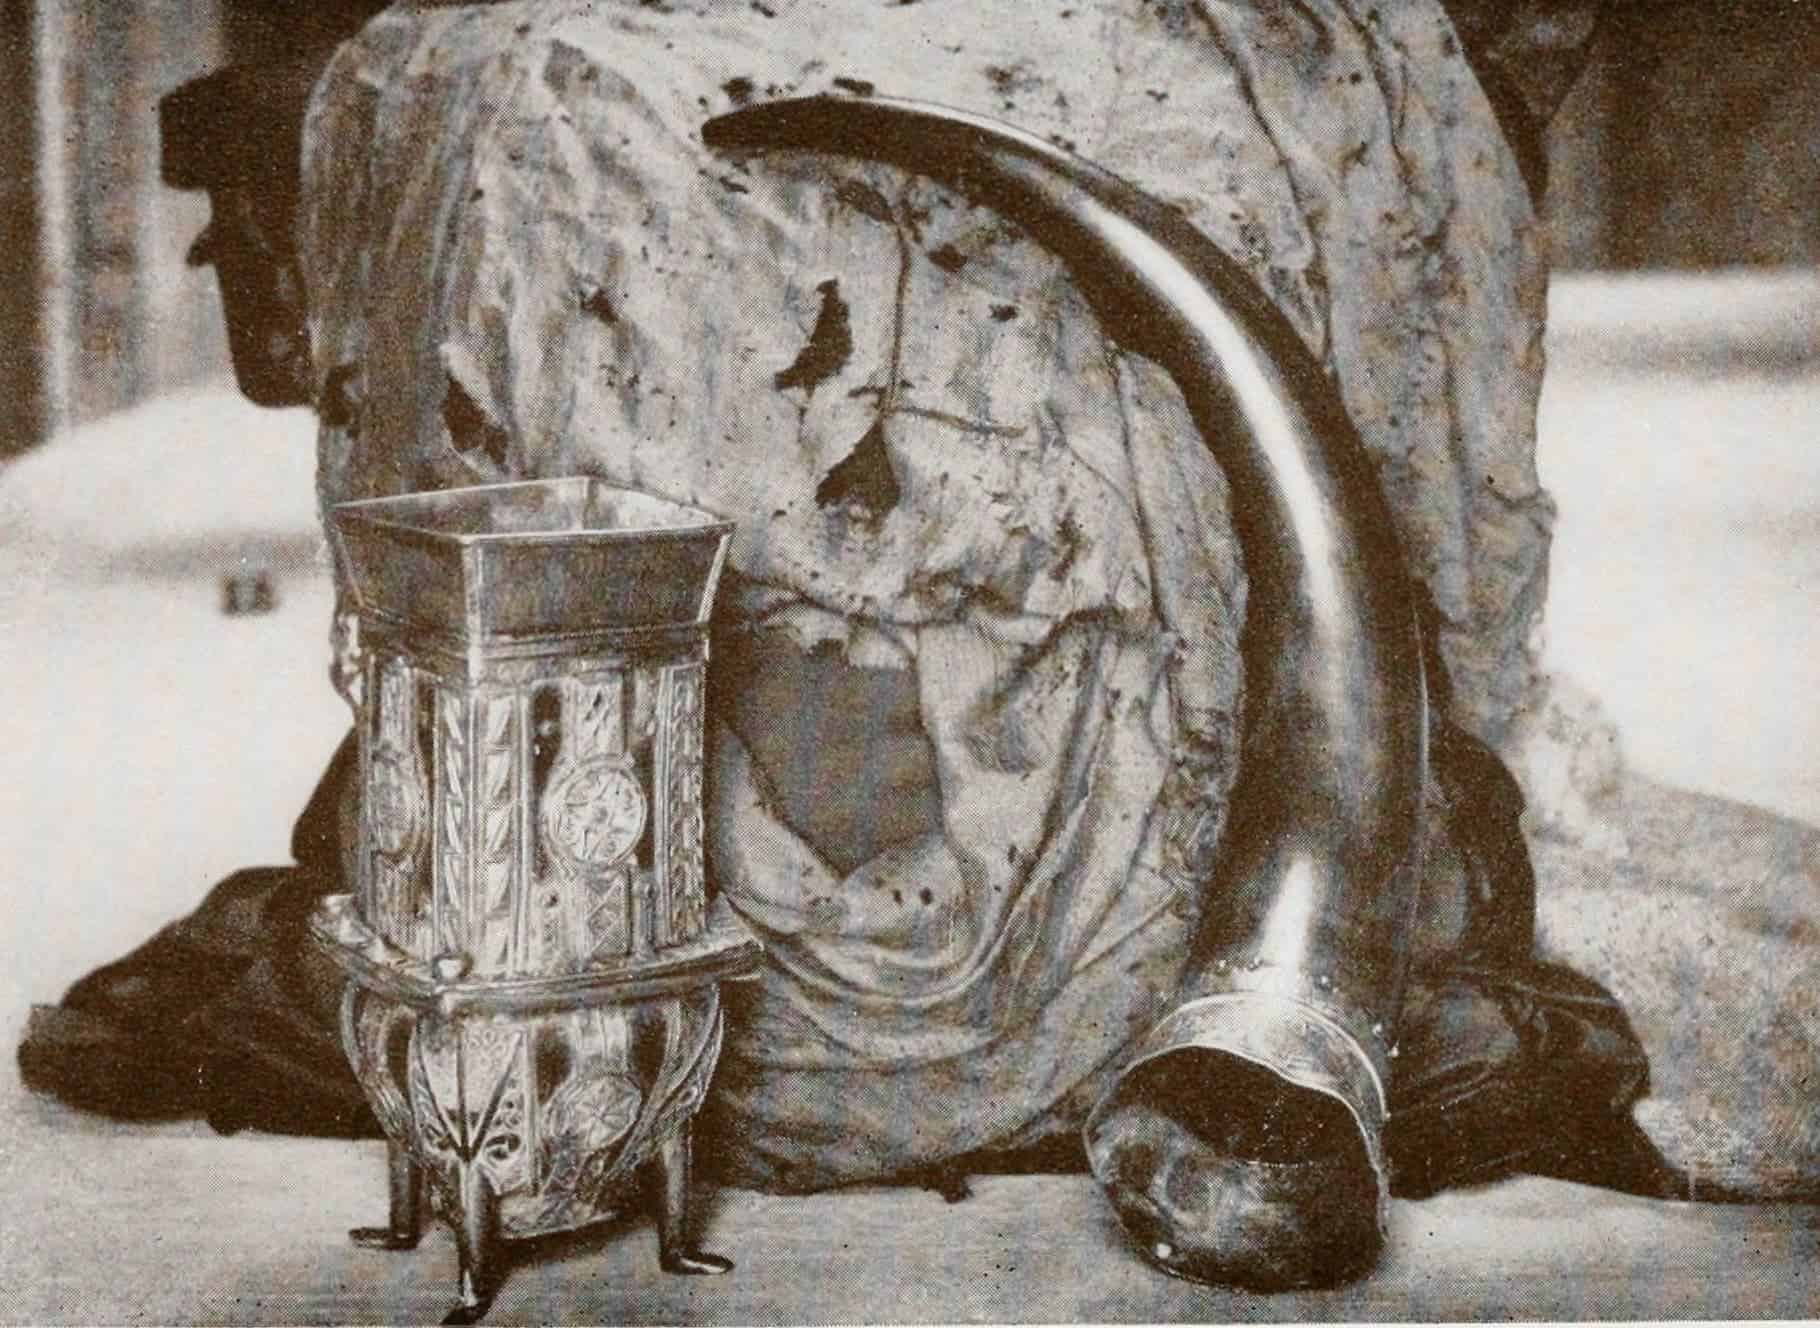 A photo of the Dunvegan Cup, Fairy Flag, and Rory Mor's Horn, all cherished heirlooms of the MacLeod clan. Photo by Roderick Charles MacLeod, 1927.